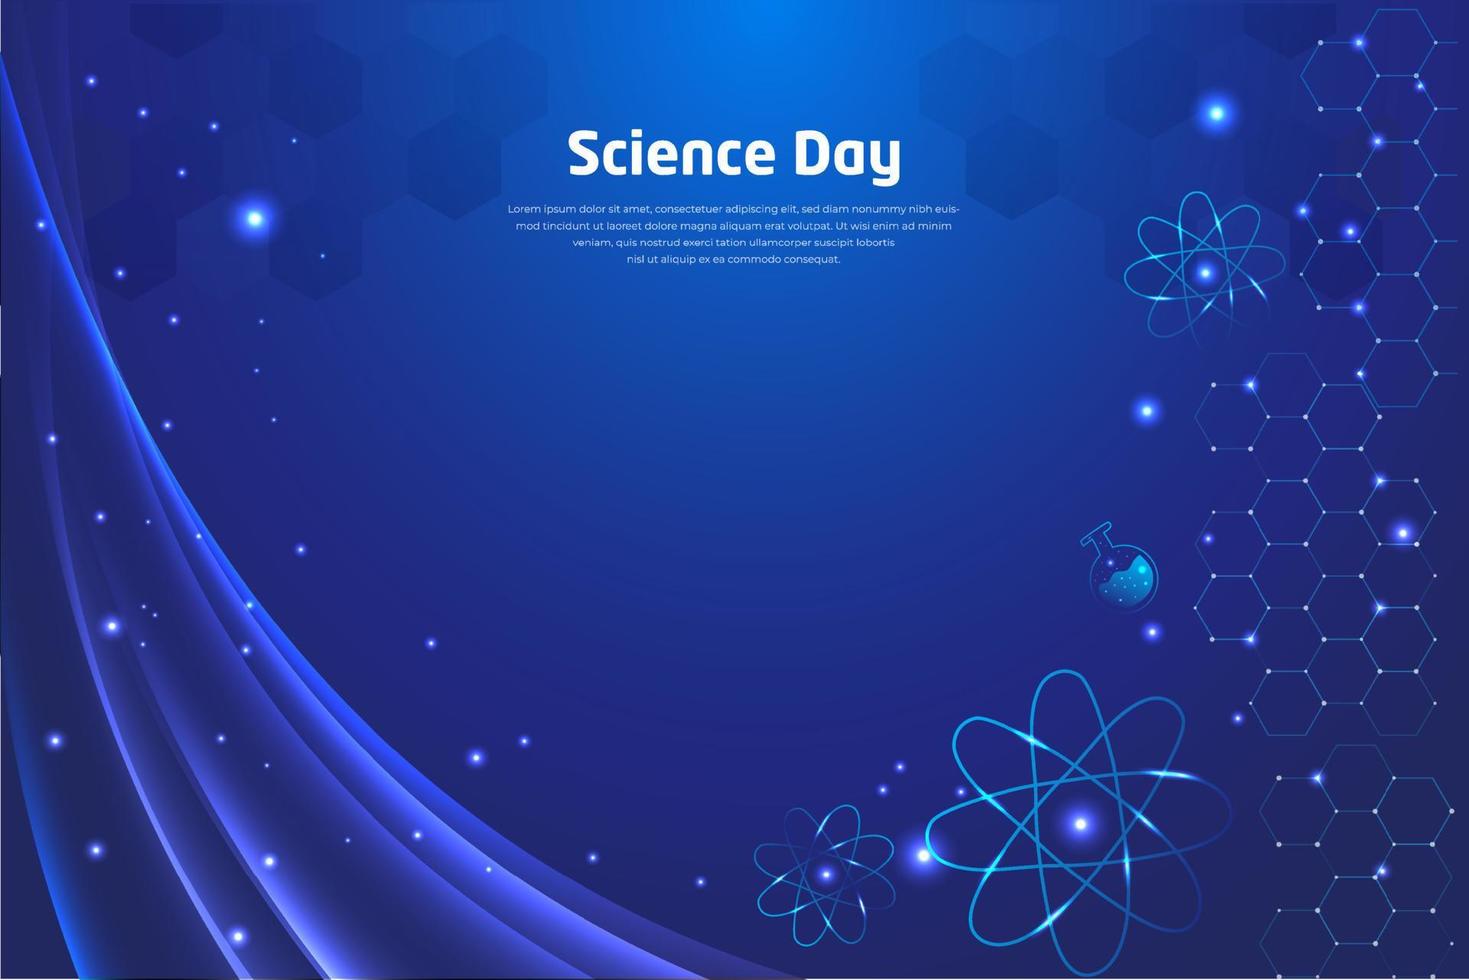 Modern Science Day design background with technology  and geometric elements vector. vector